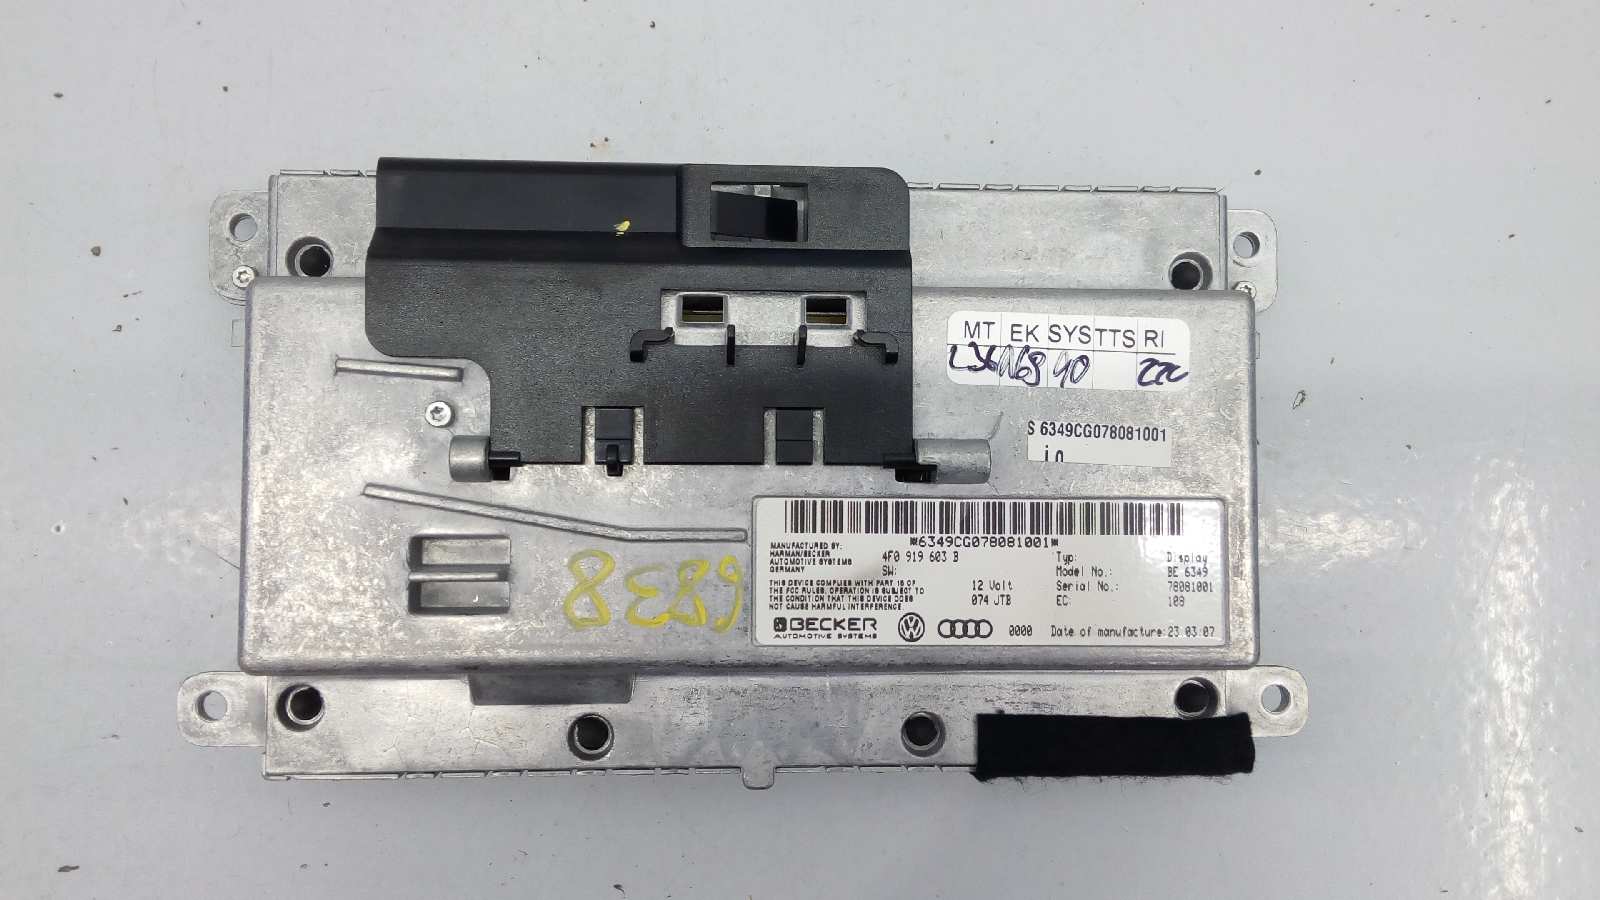 AUDI A6 C6/4F (2004-2011) Music Player With GPS 4F0919603, E2-A1-10-4 18528939